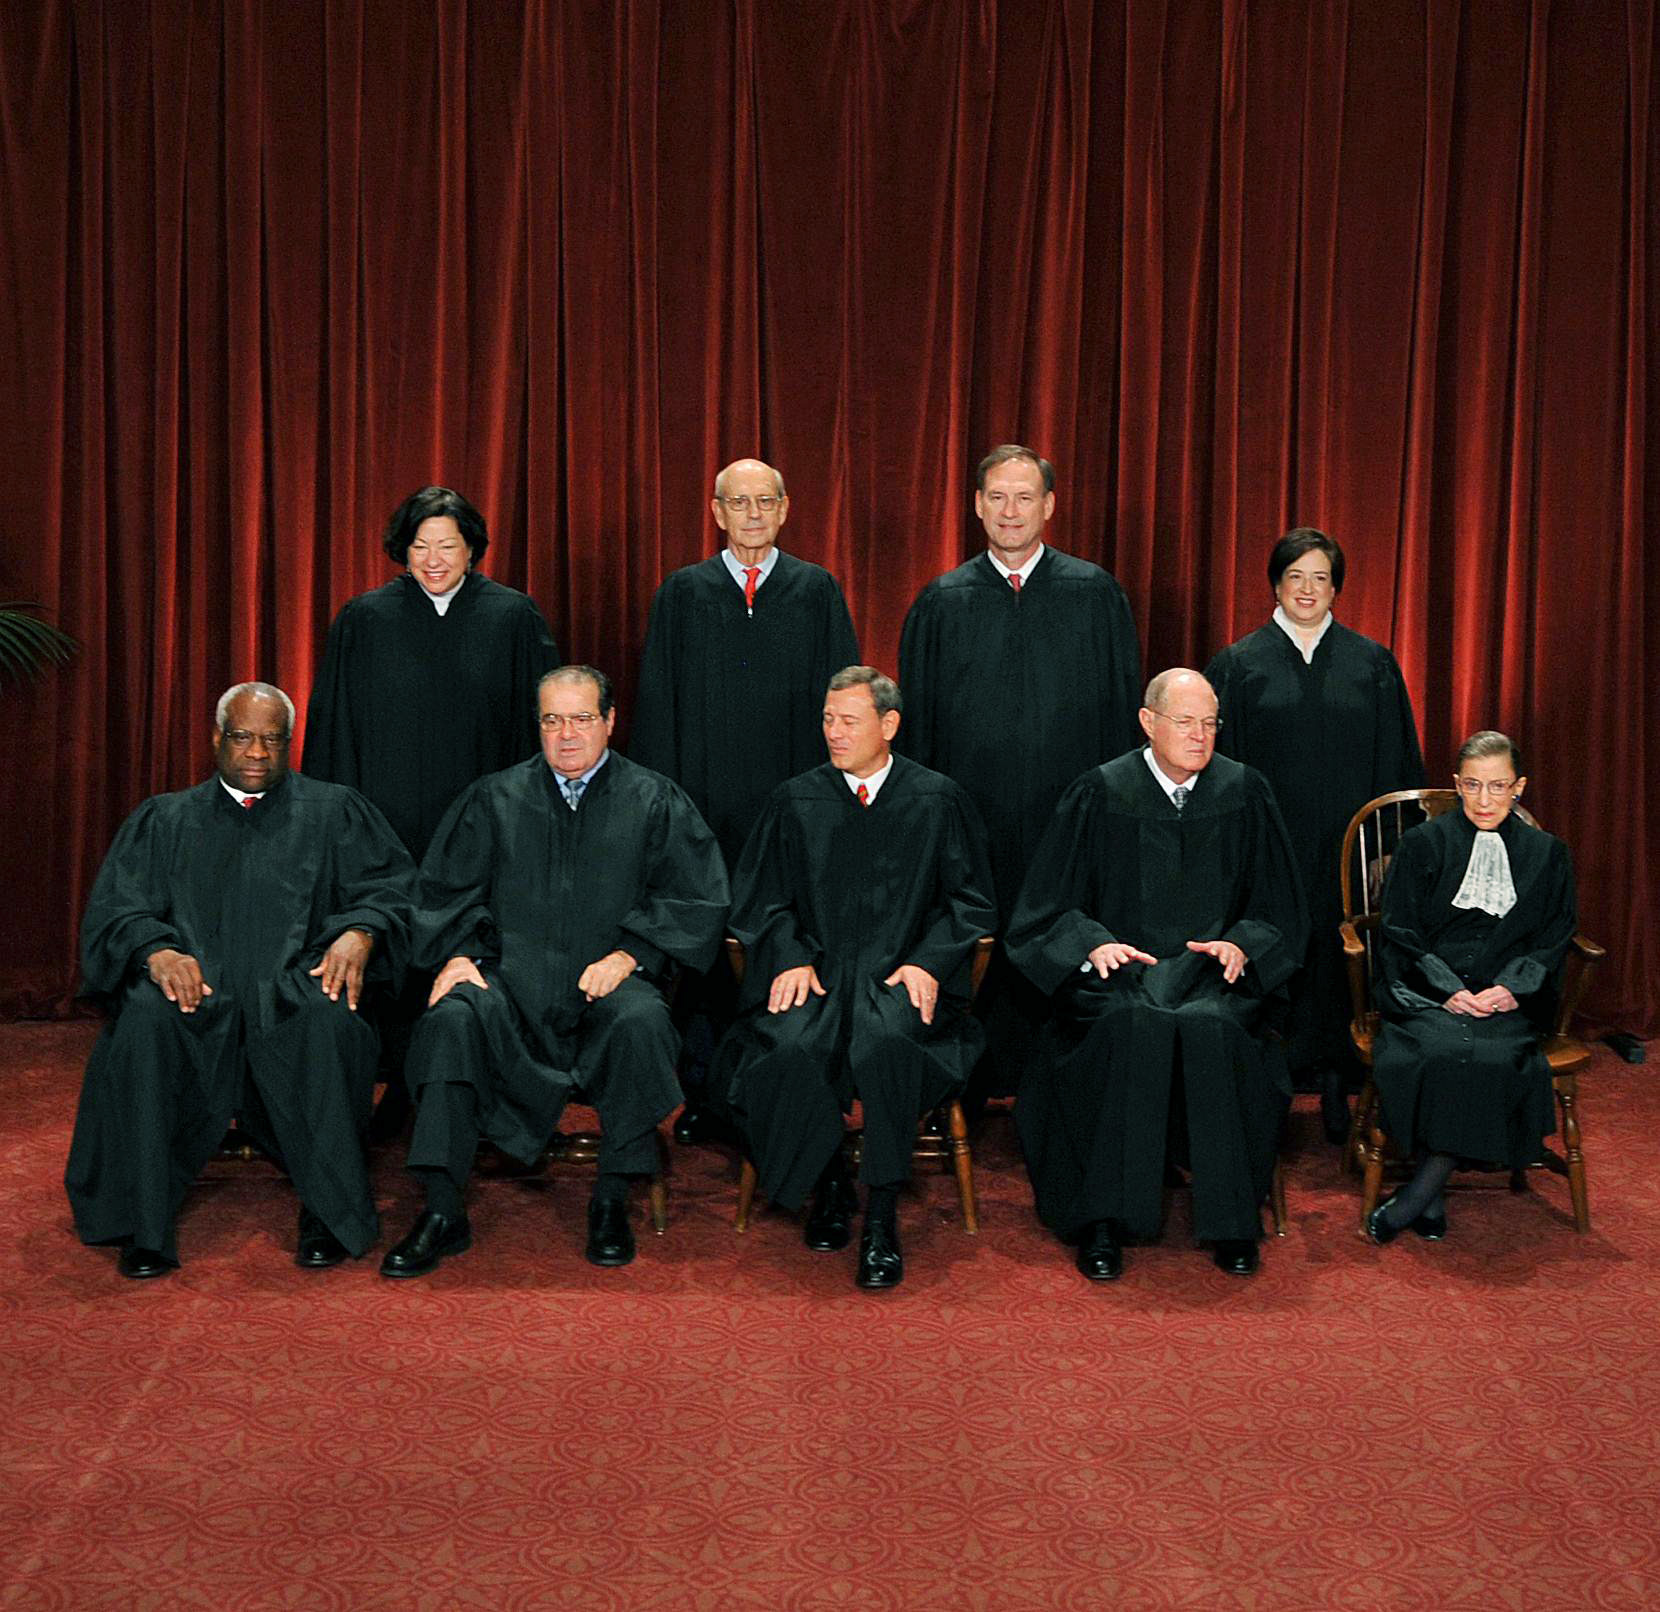 PHOTO: The Justices of the US Supreme Court sit for their official photograph at the Supreme Court